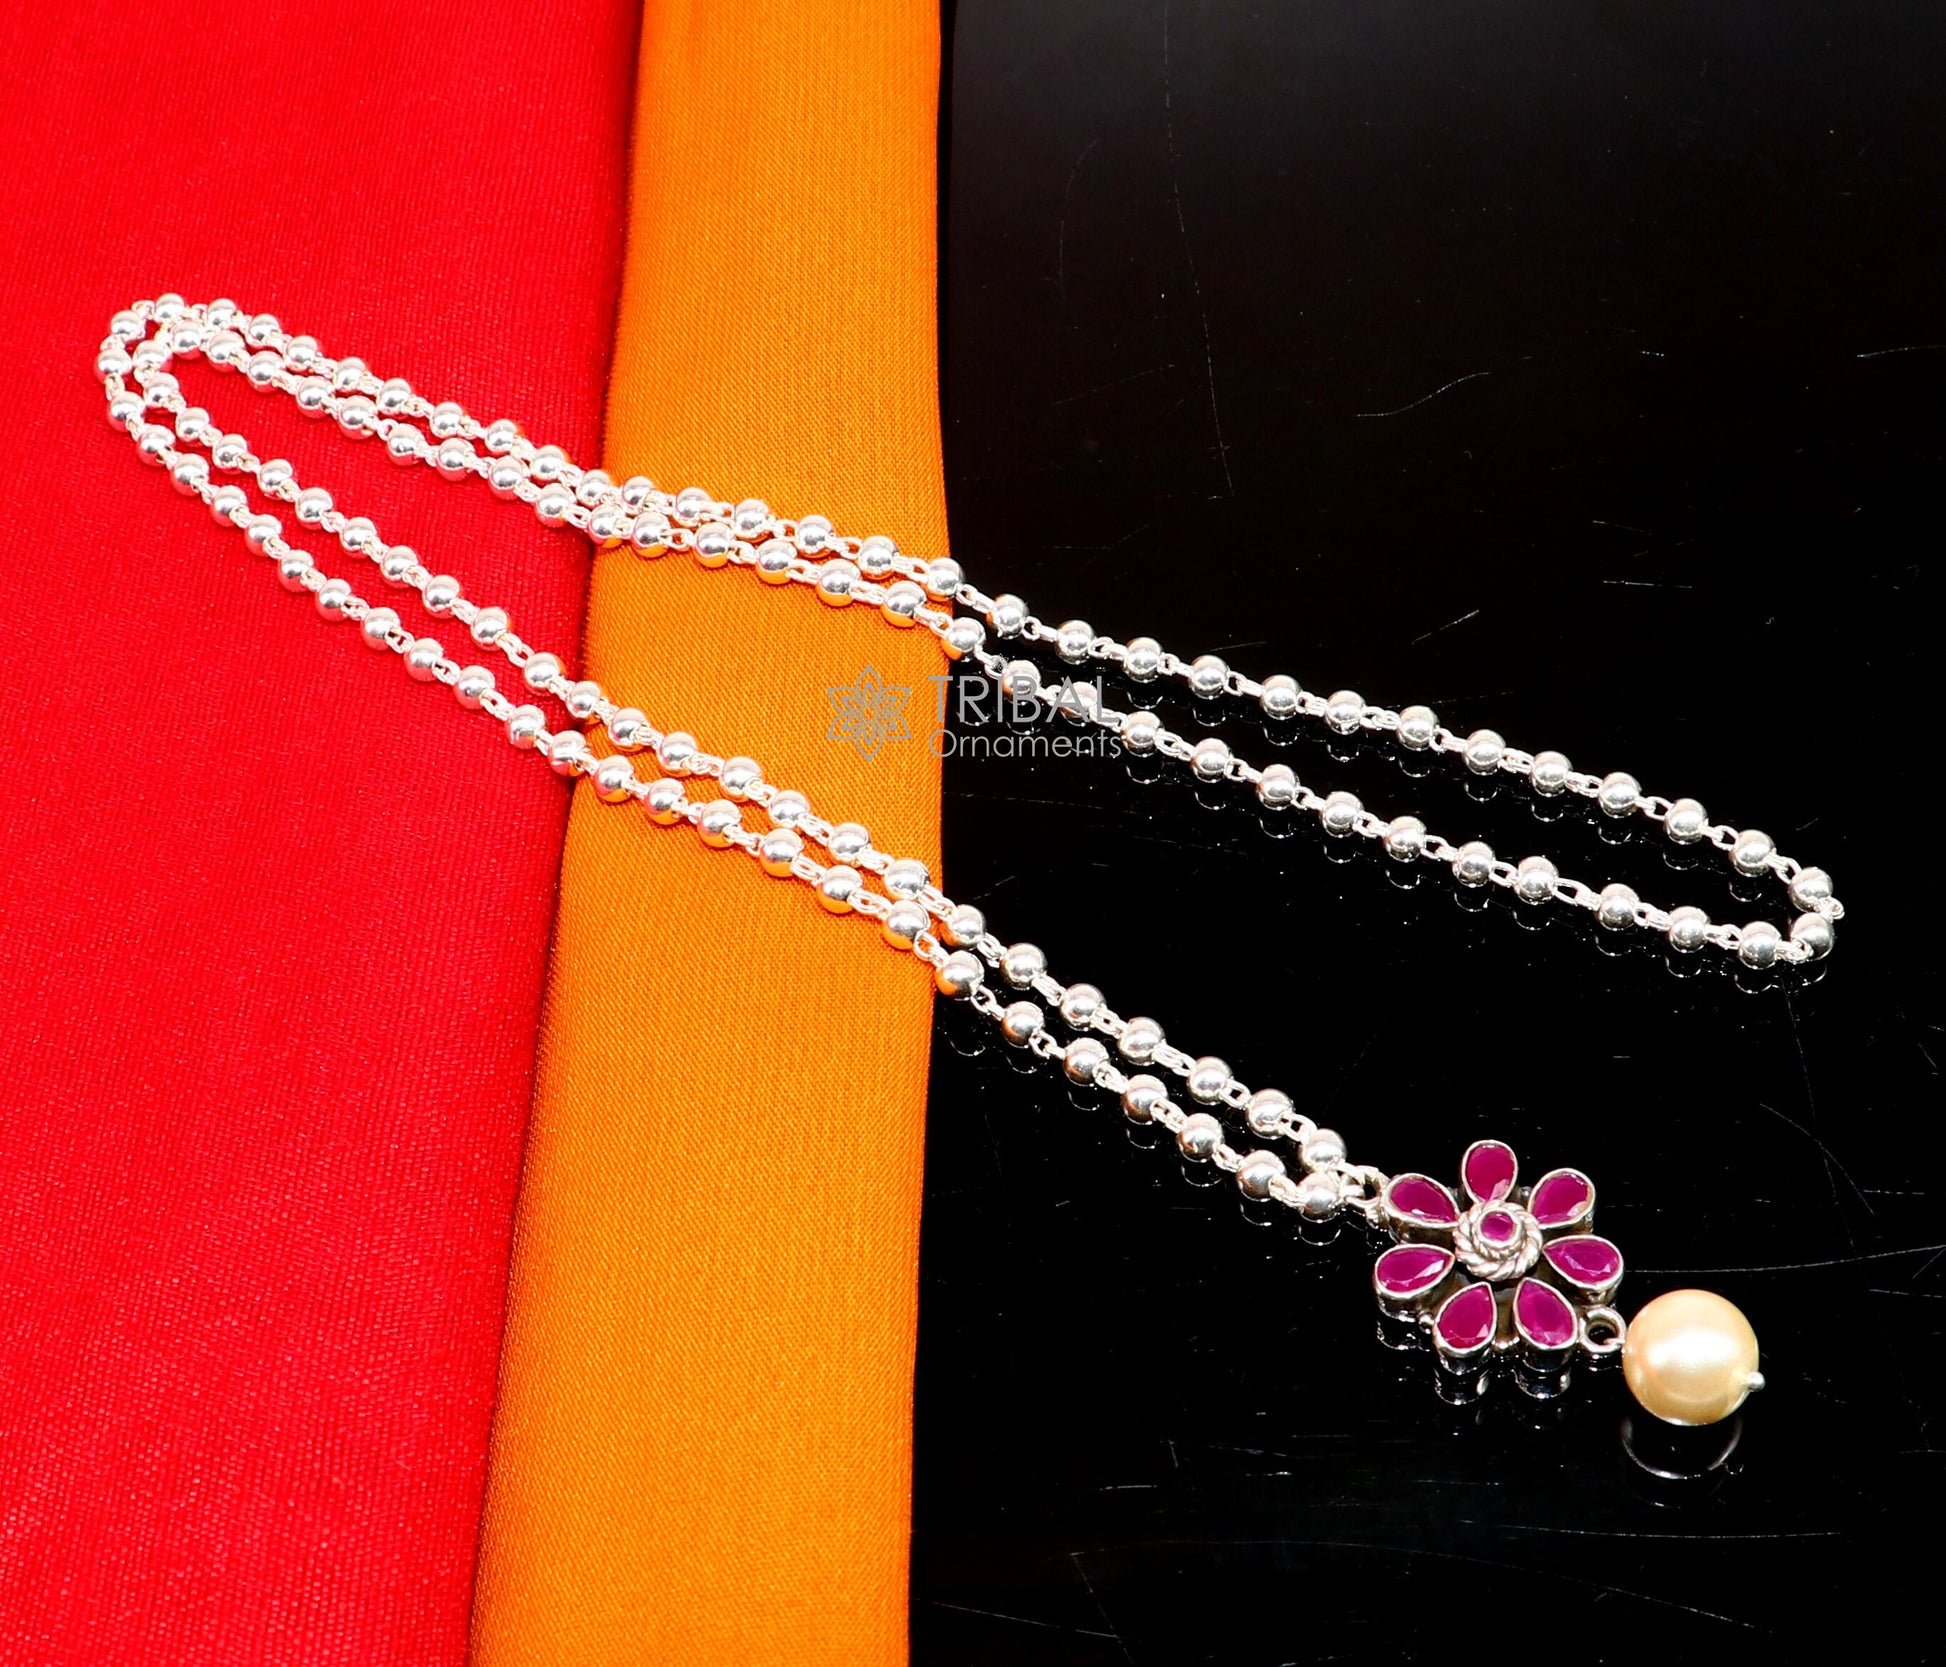 Traditional cultural trendy 925 sterling silver plain beads ball chain necklace with flower design pendant and hanging pearl jewelry set577 - TRIBAL ORNAMENTS